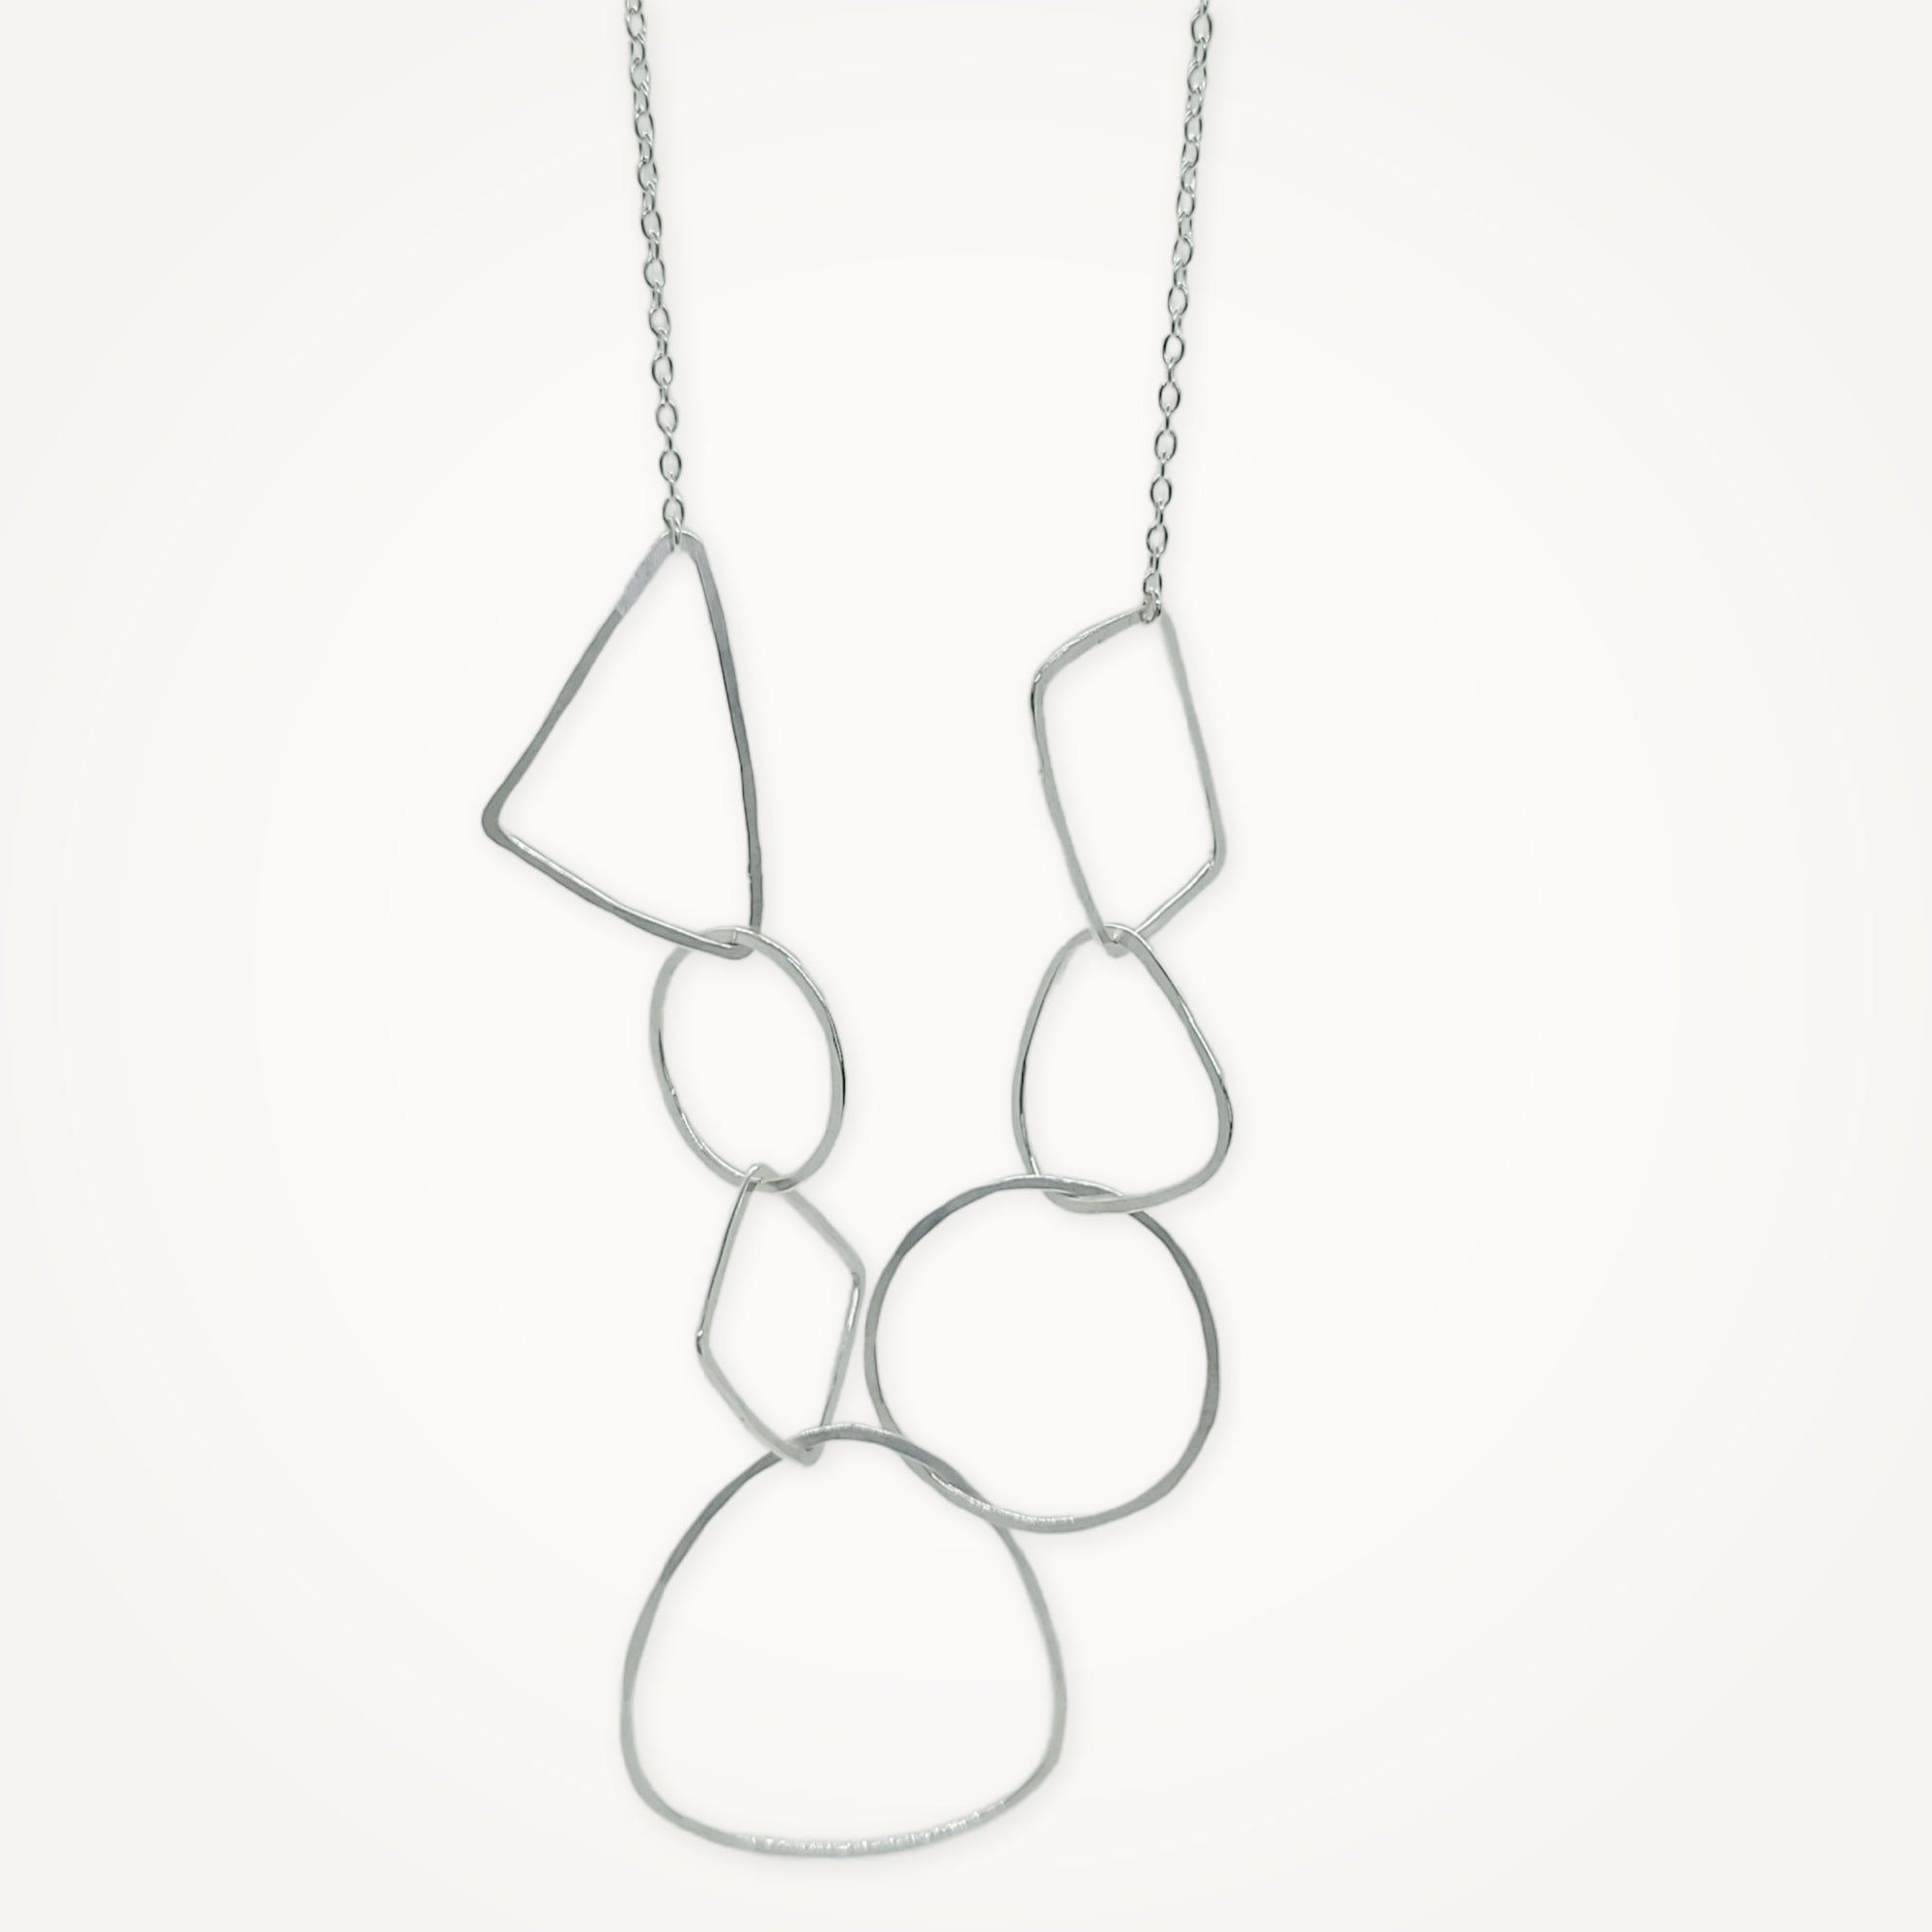 Geo Shapes Necklace